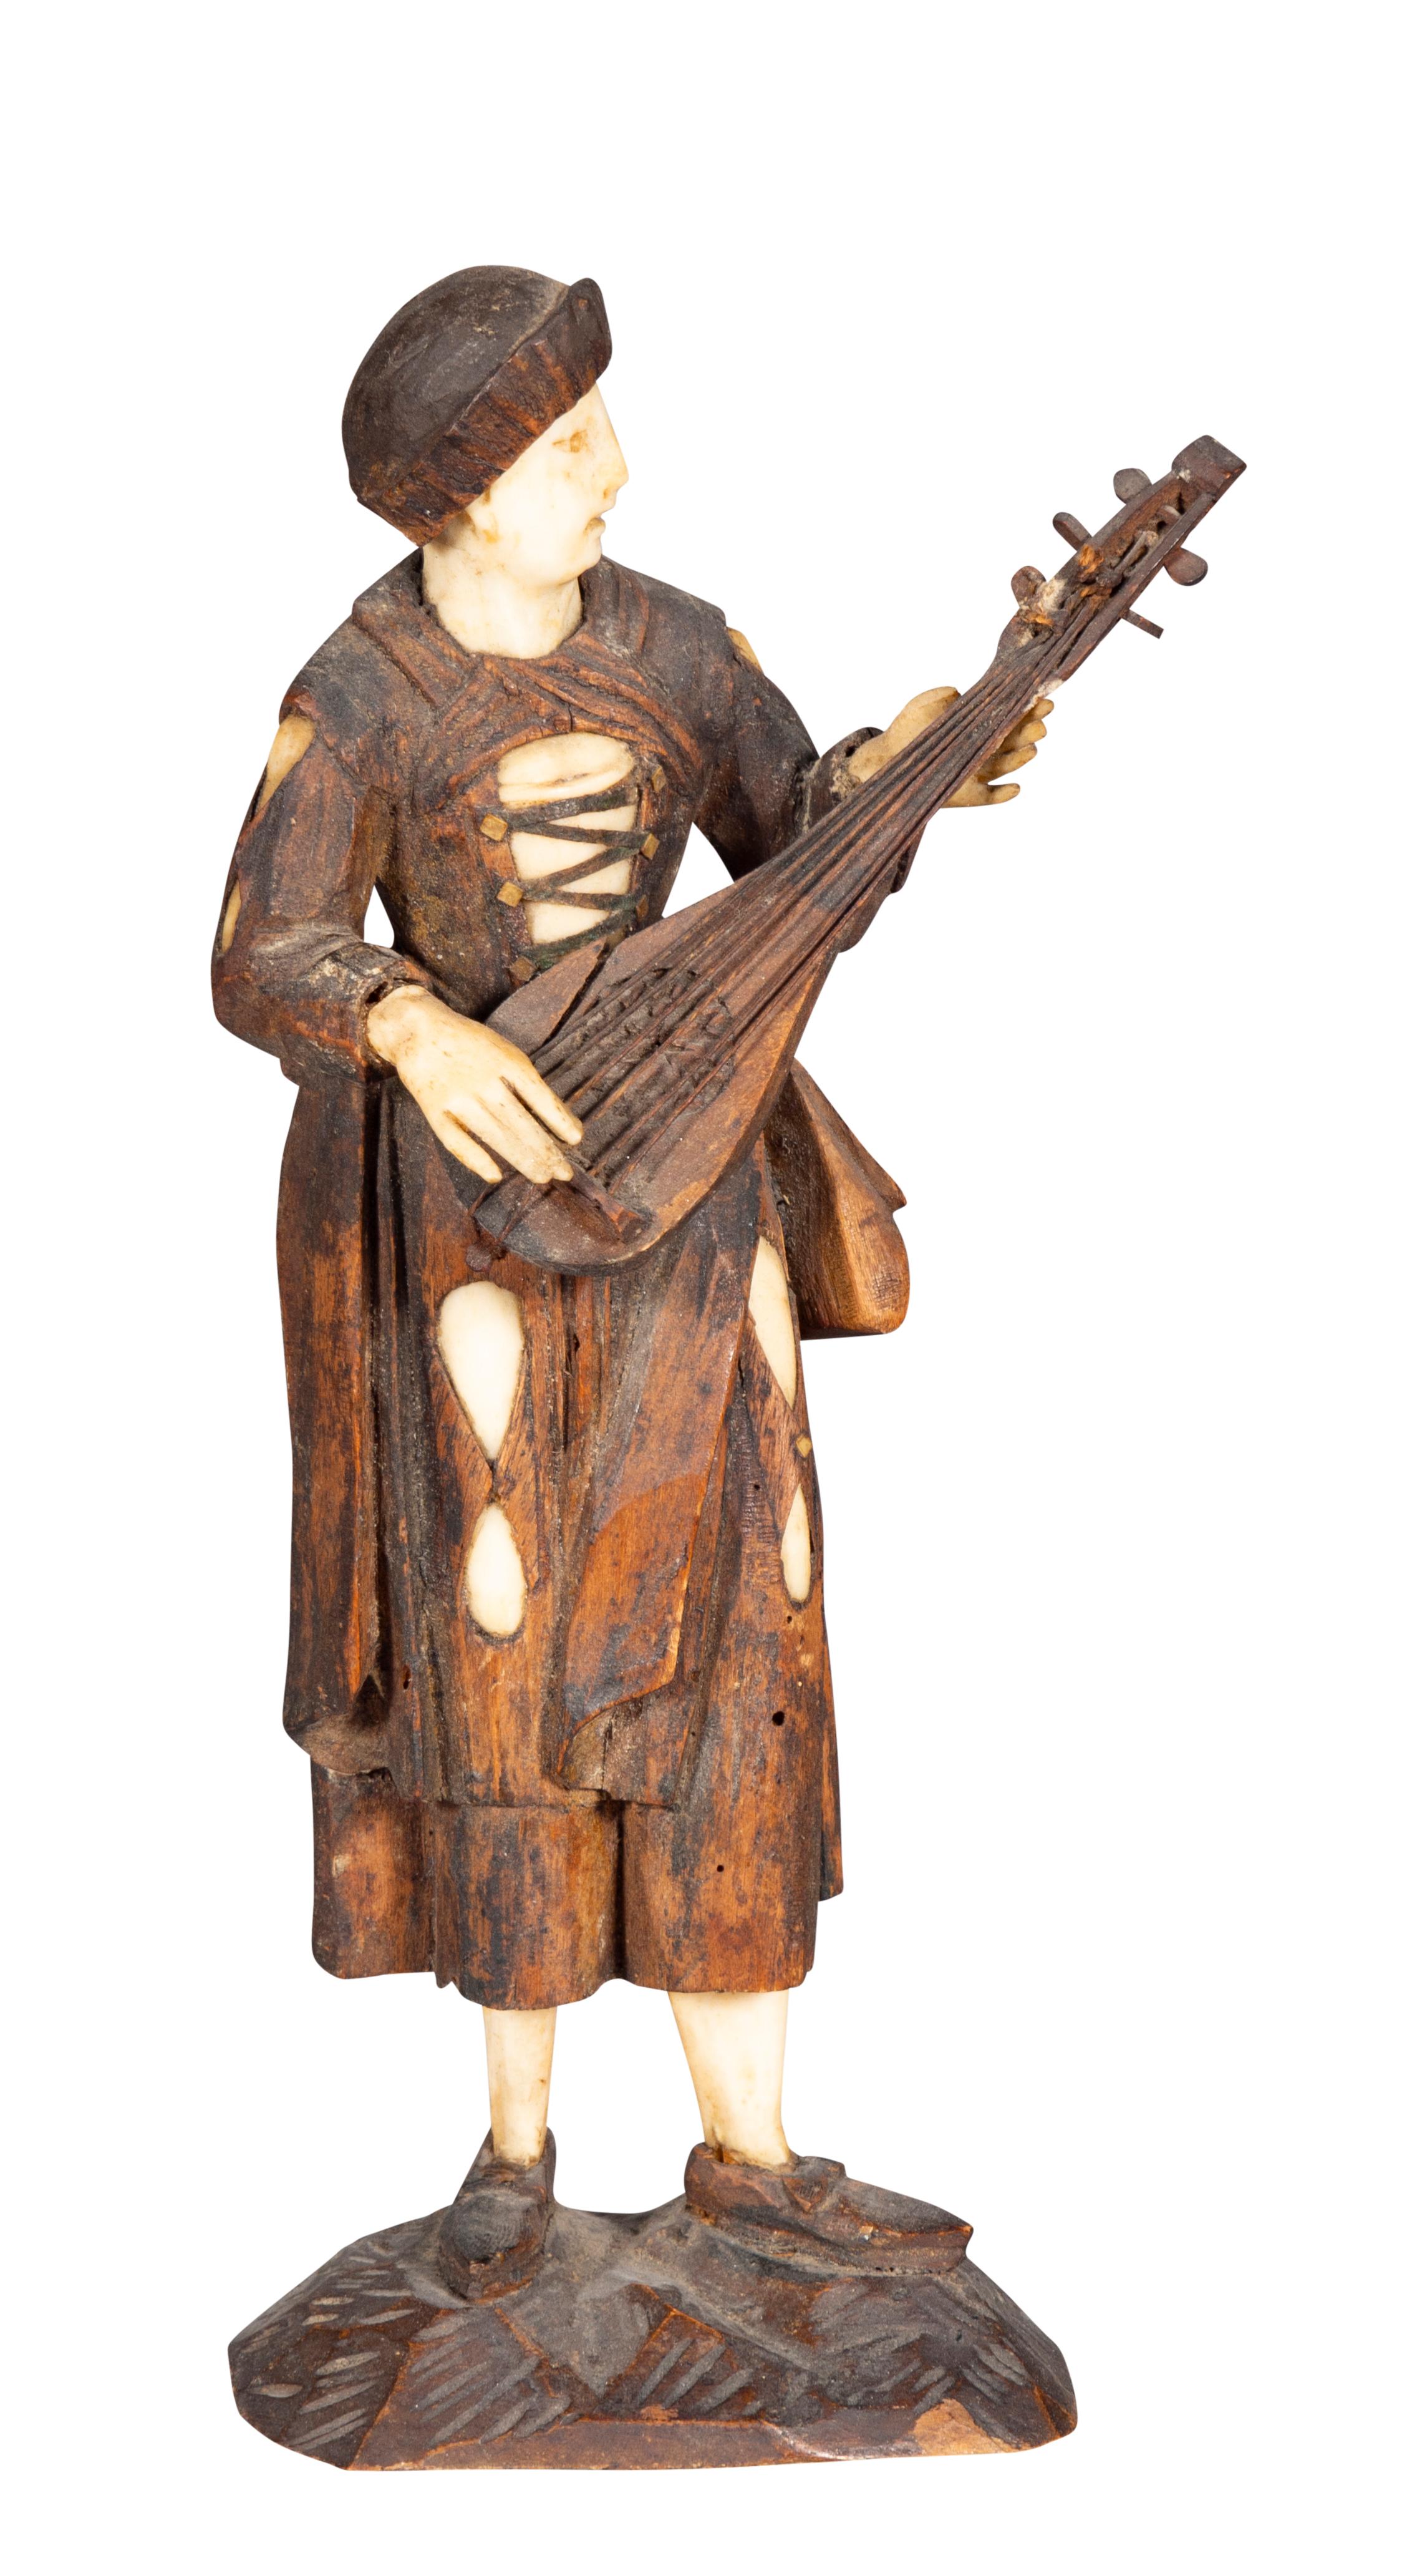 Six carved figures playing instruments in peasant dress. 